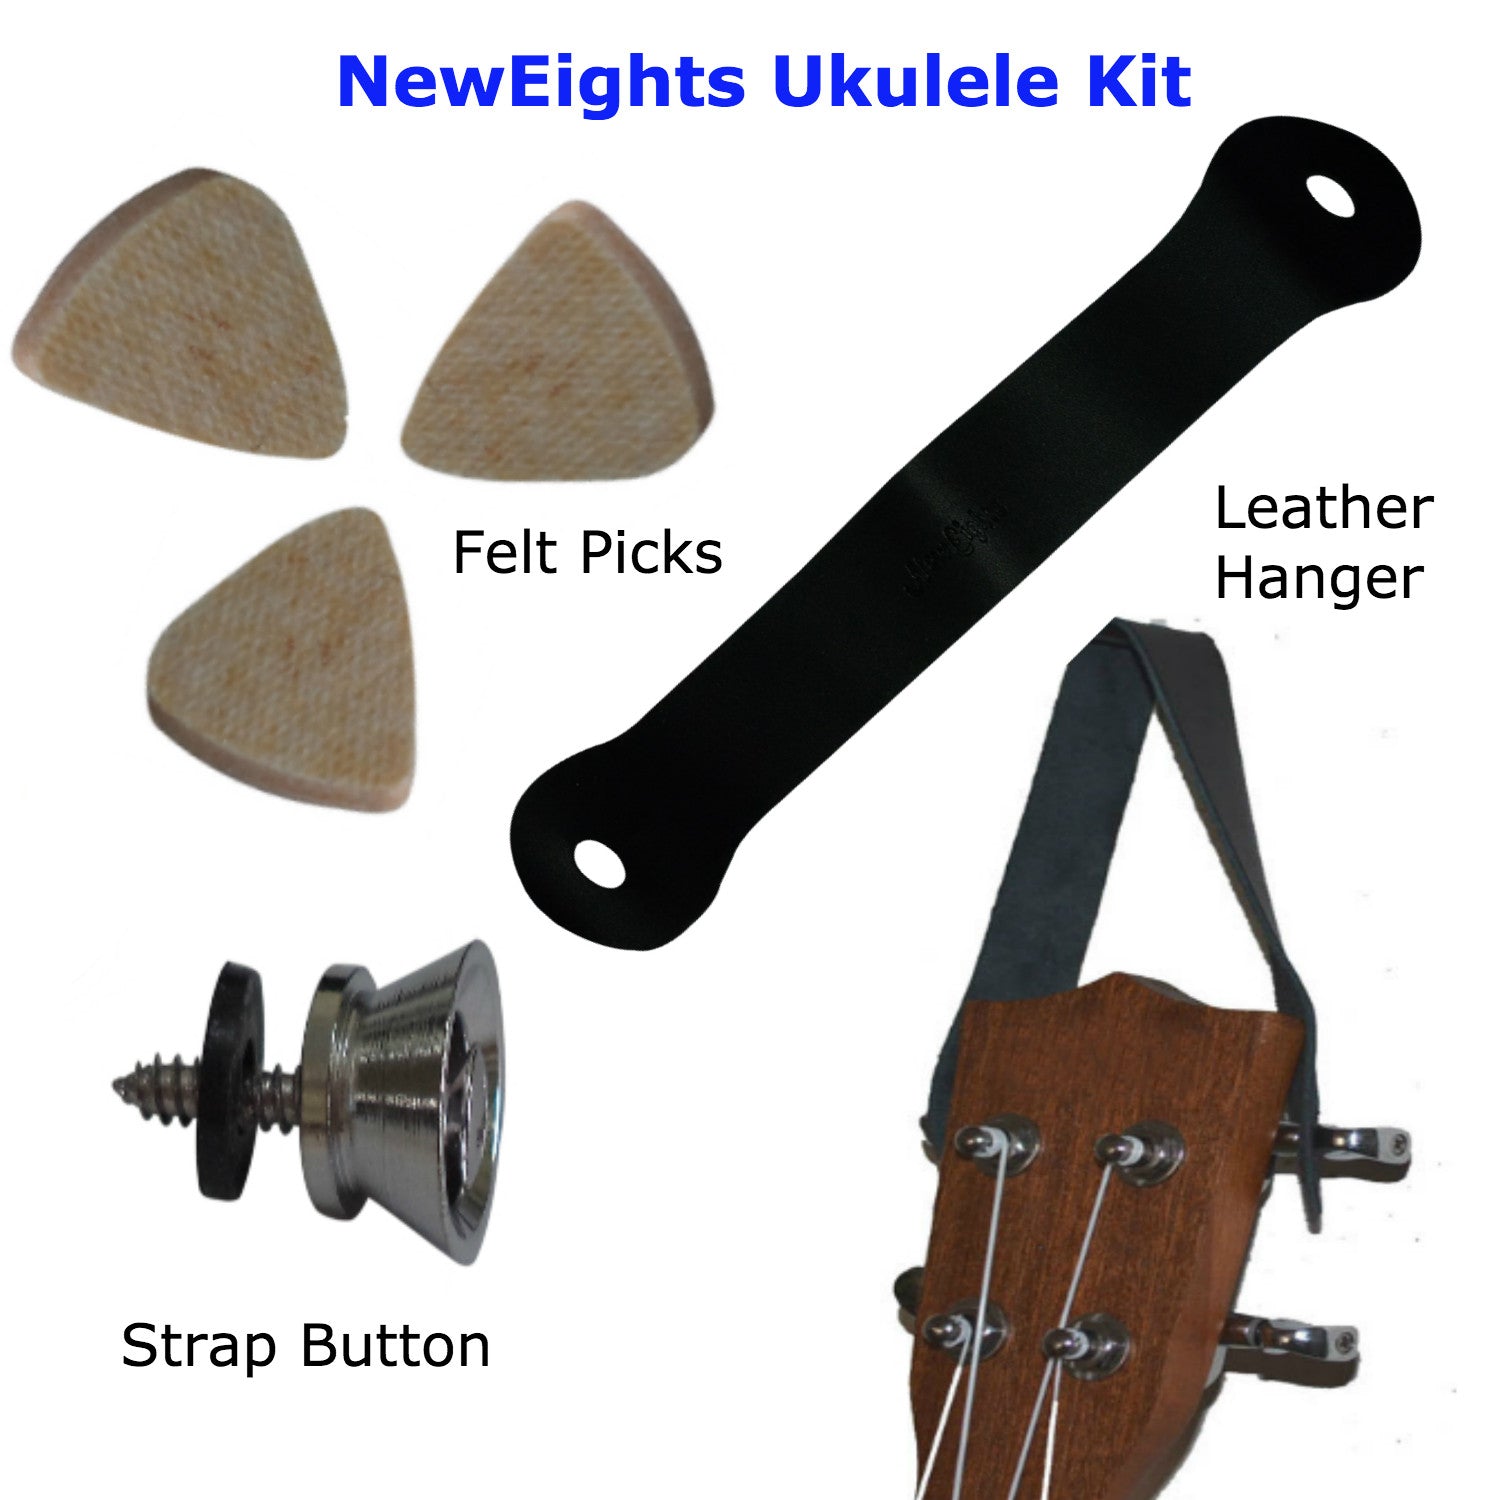 Ukulele Kit - Felts Picks, Uke Strap Button and Hanger Set Accessories Pack - Best Gifts for Ukulele Players by NewEights